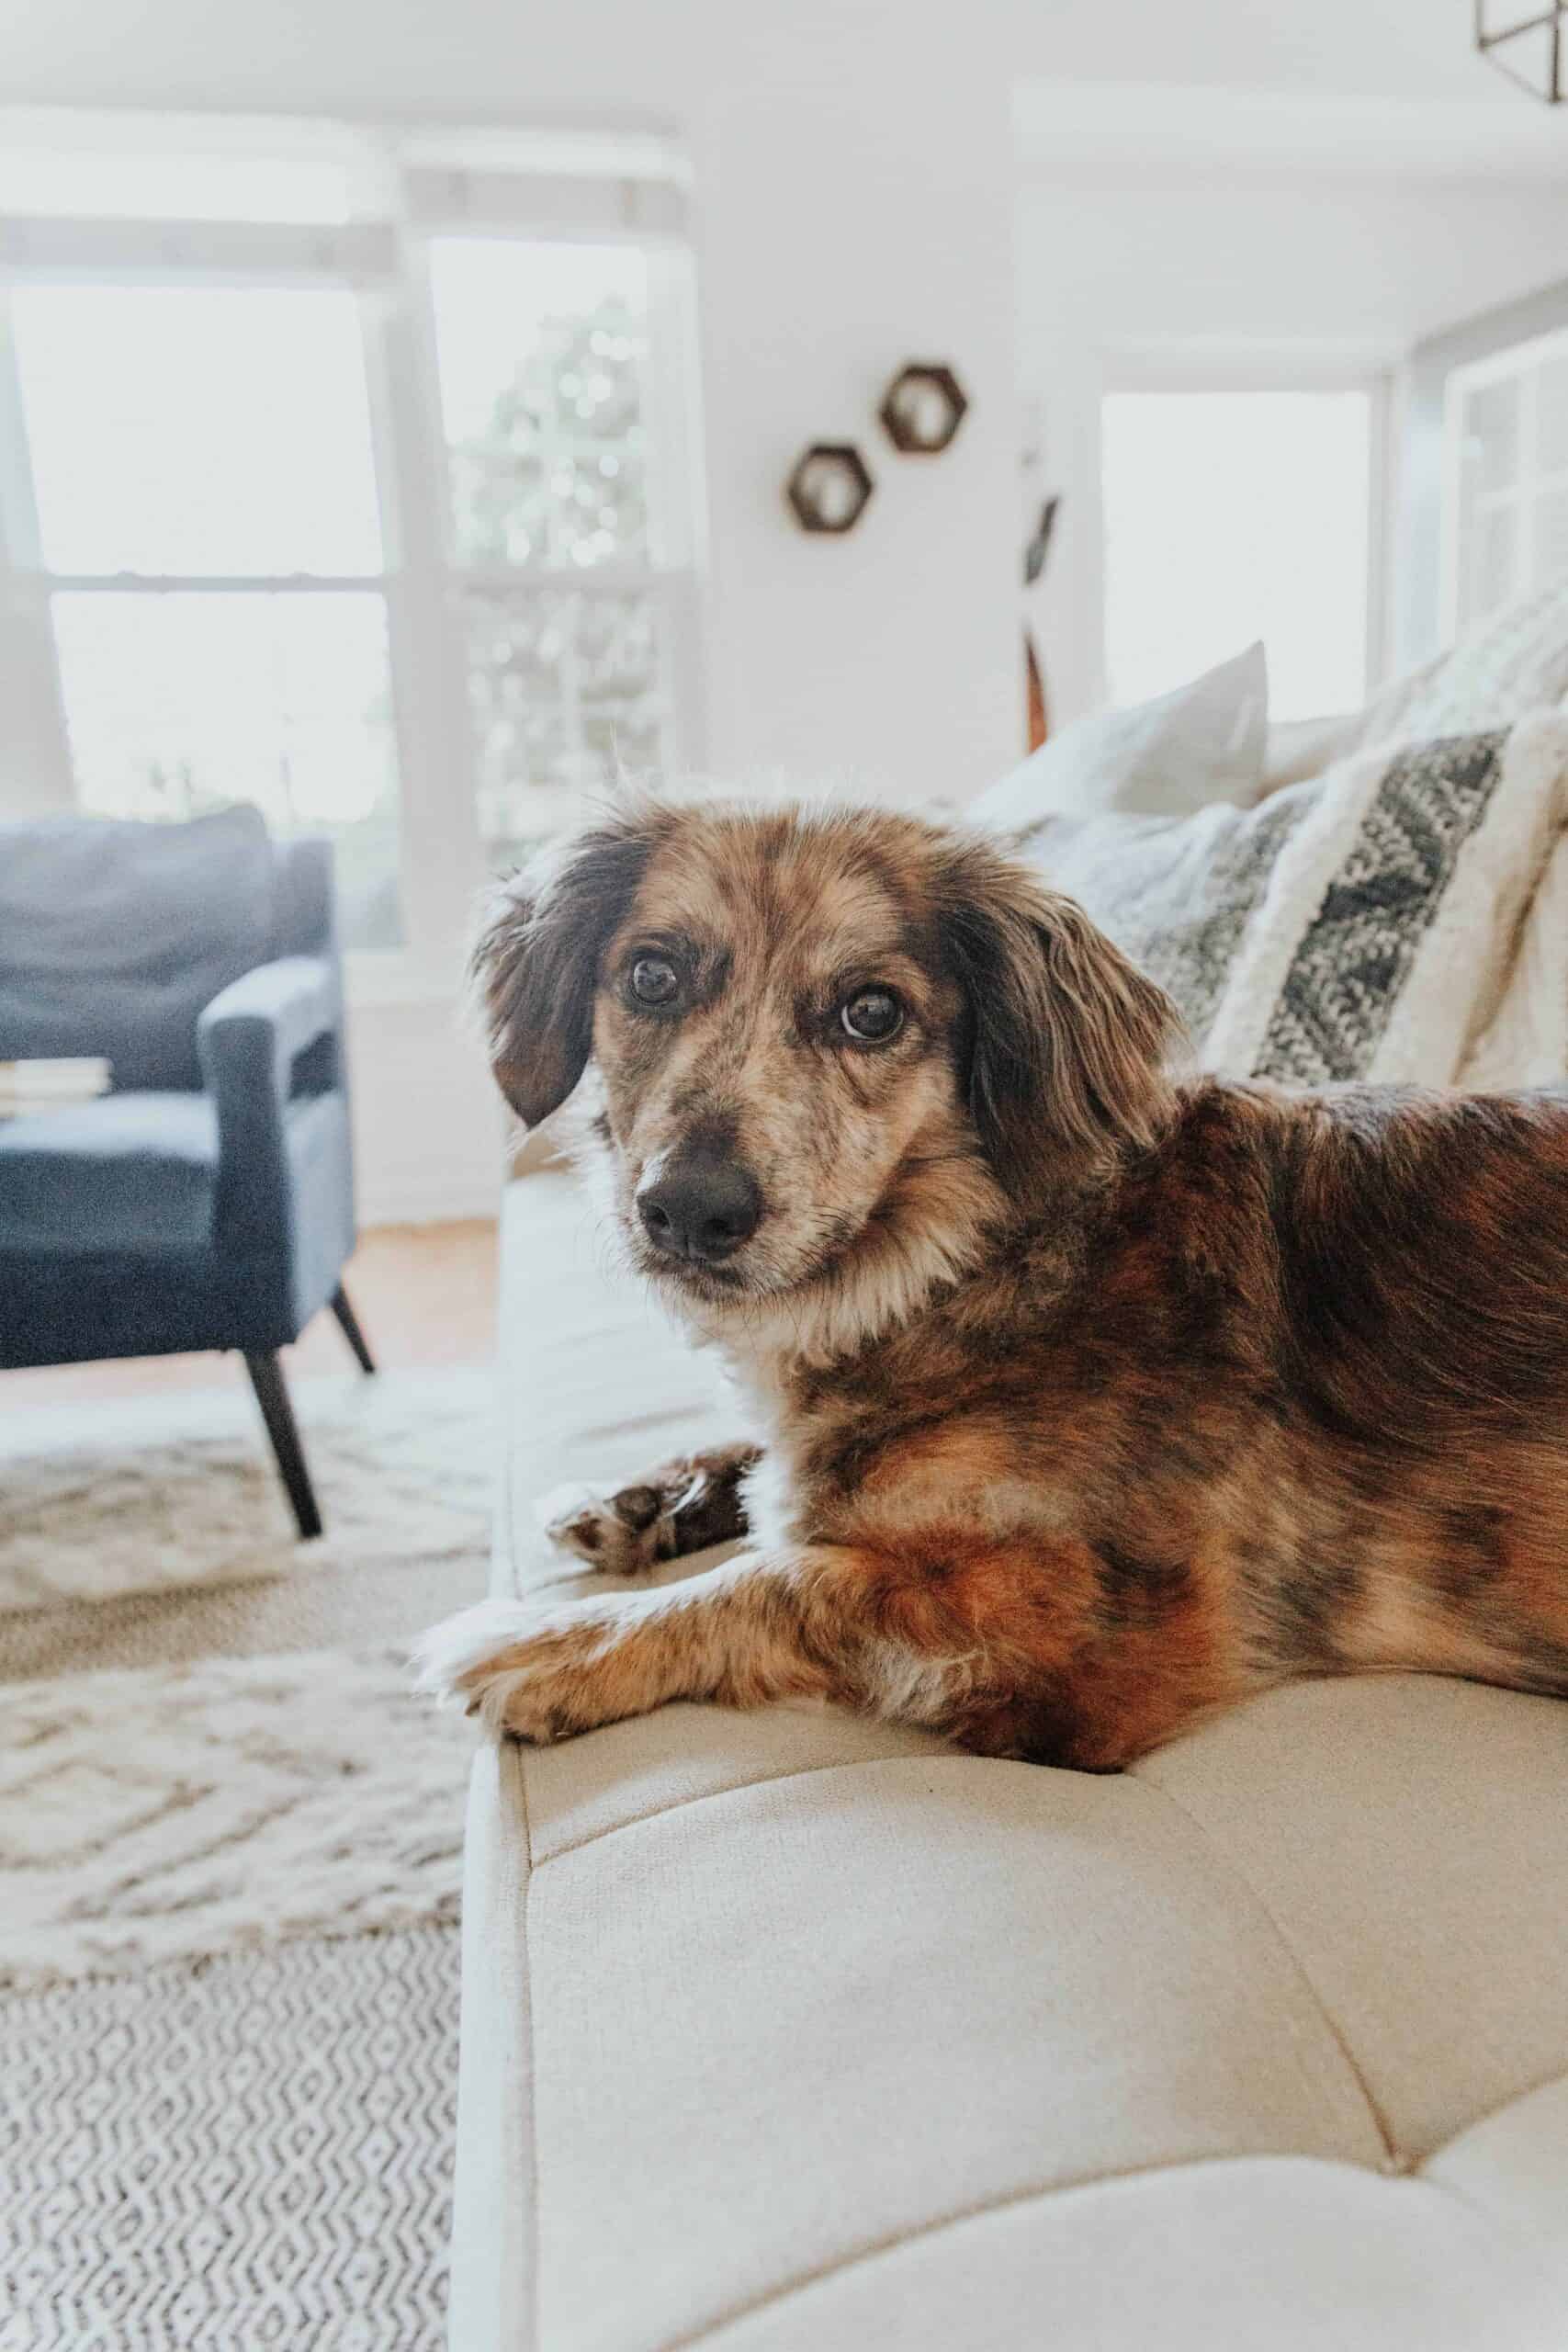 A brown dog sitting on a couch looking at the camera.